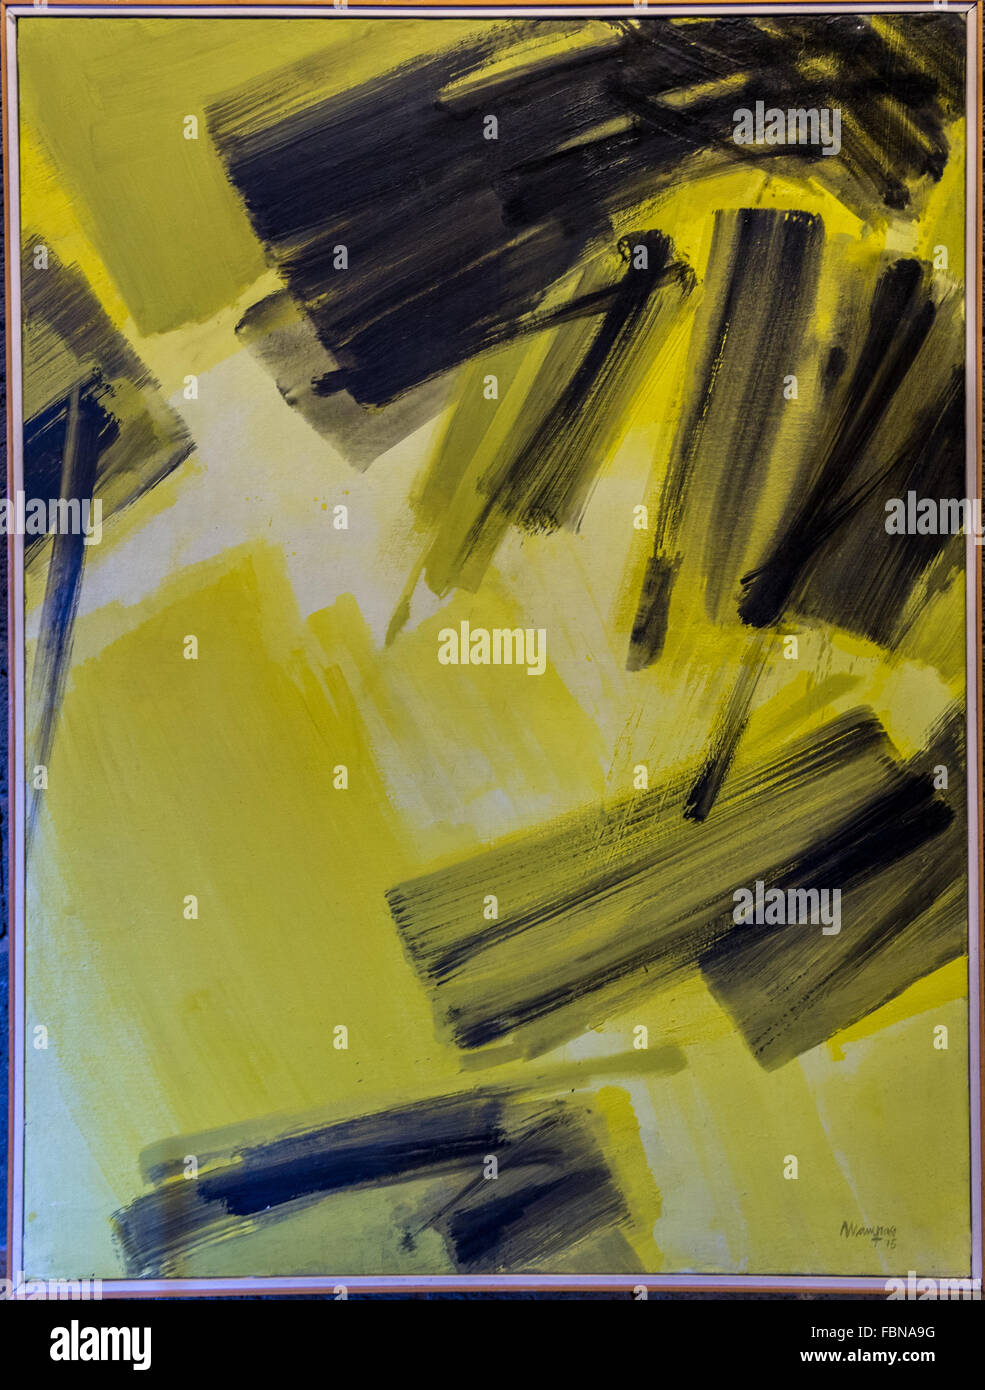 Amarillo y negro, (Yellow and Black),  by Manuel Mampaso, (1975). Oil on canvas. Stock Photo